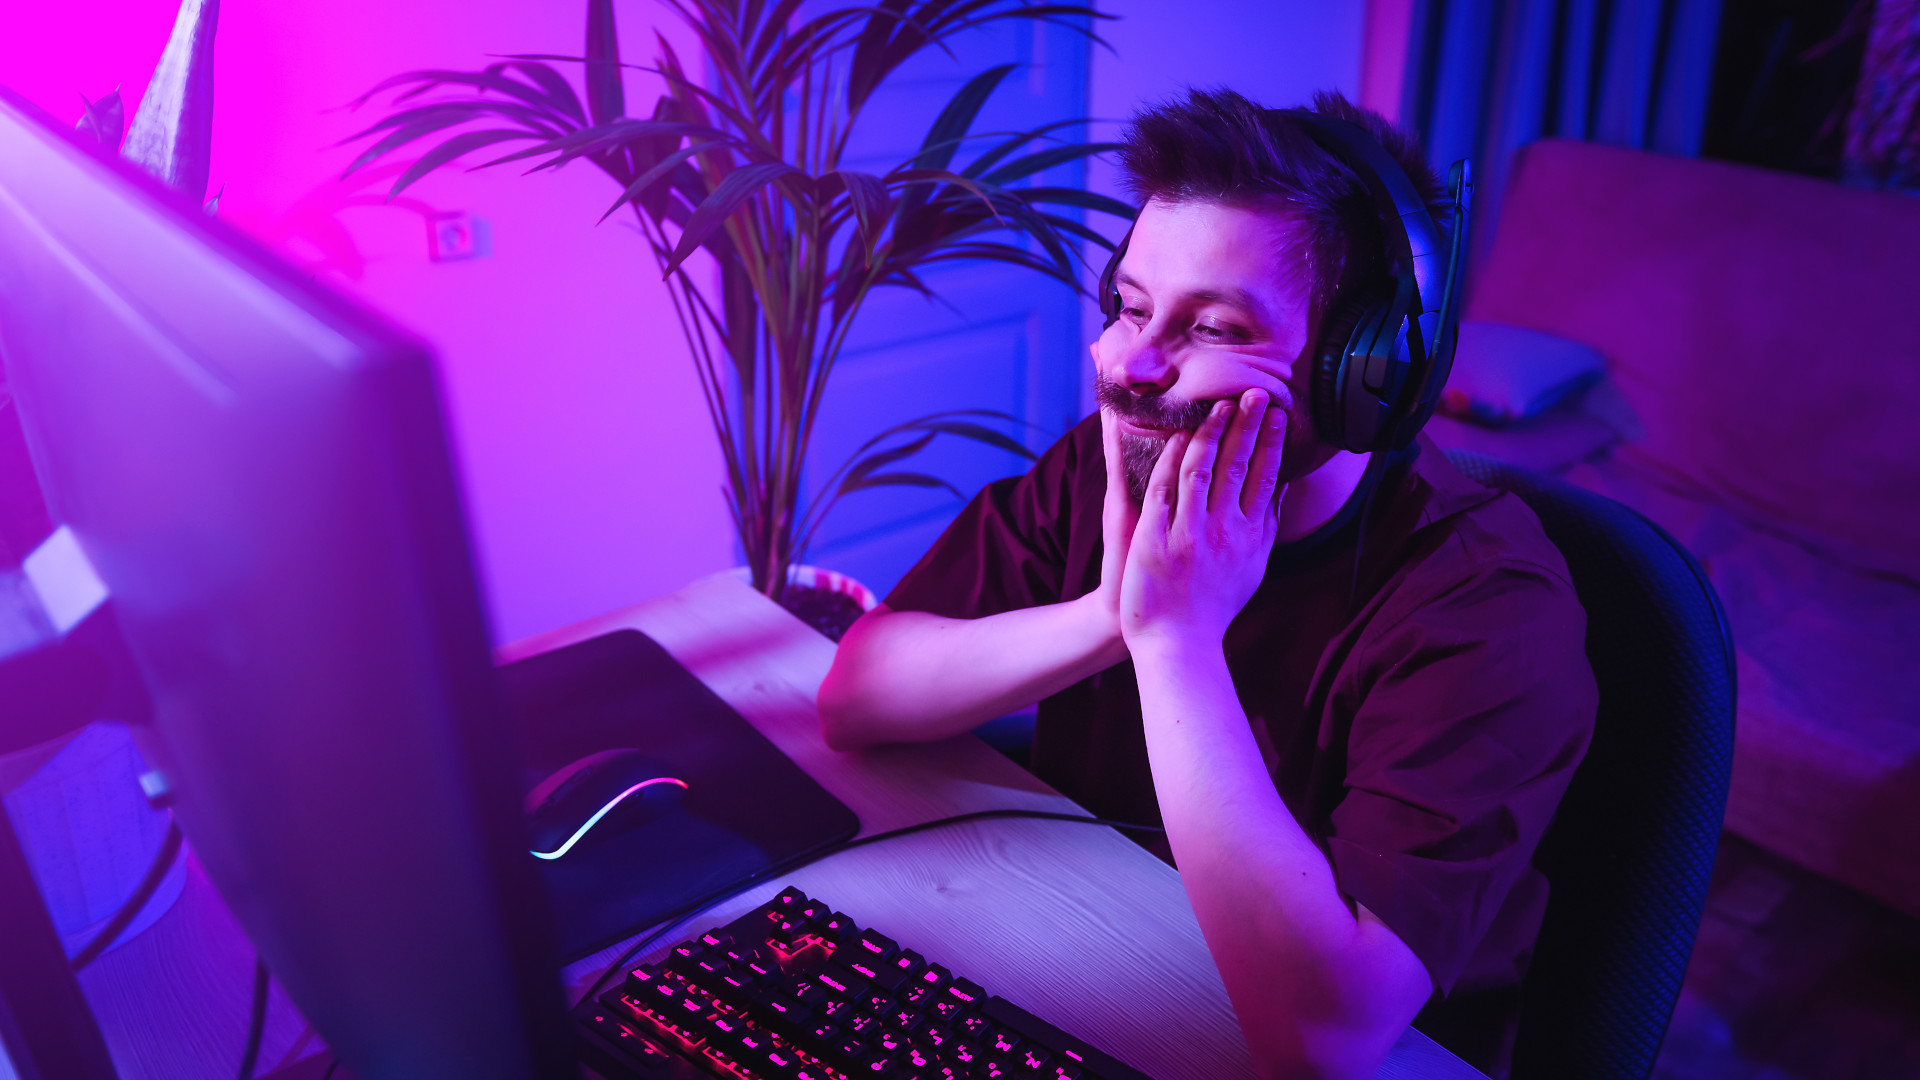 A man who looks tired and bored at his gaming computer